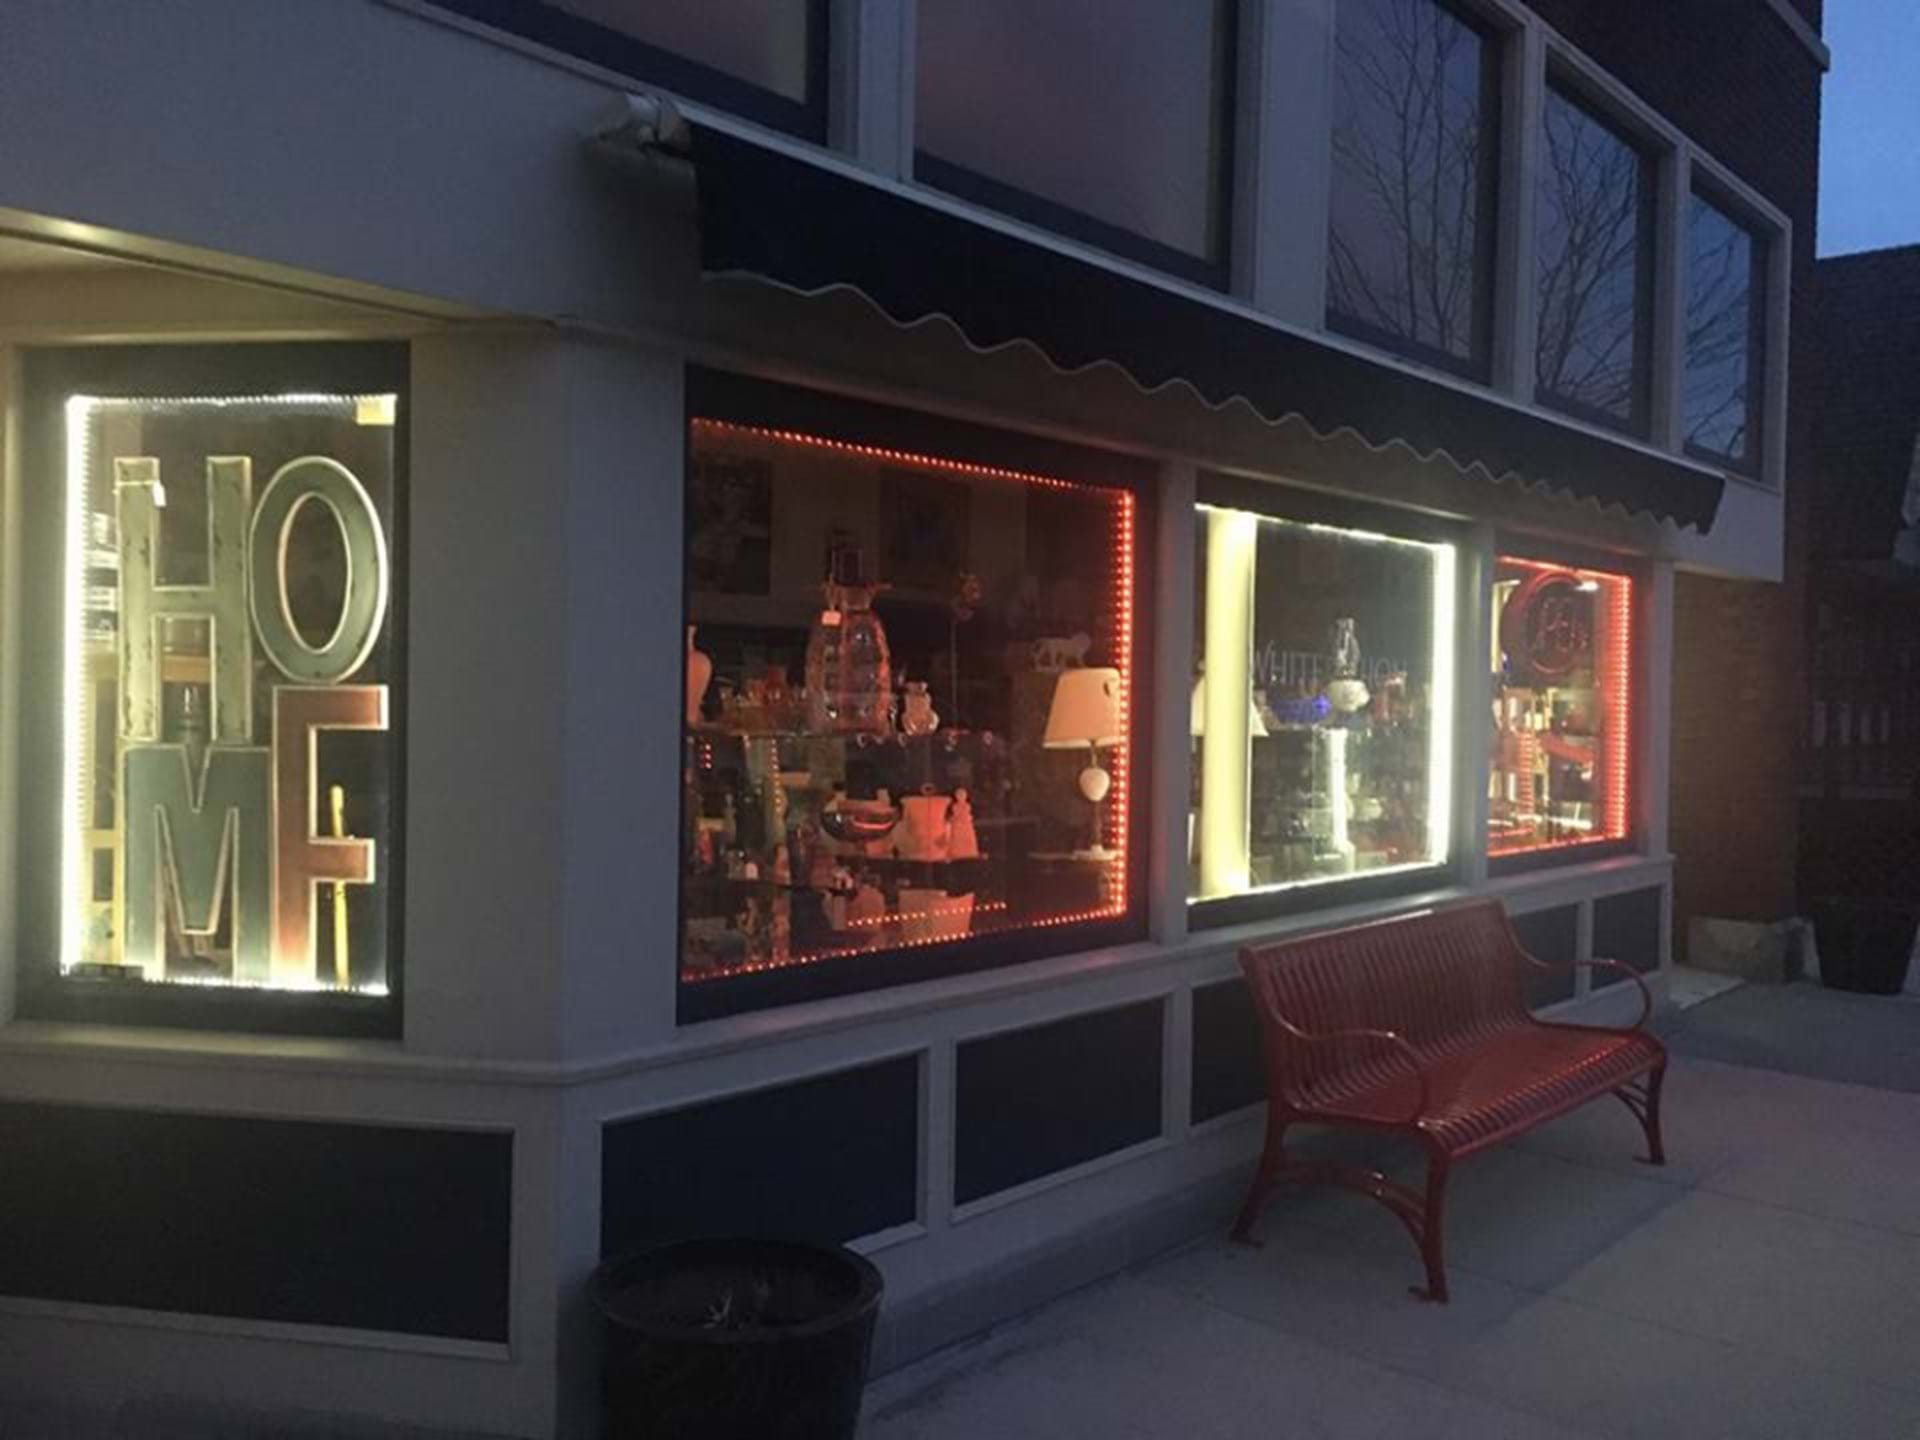 The store is lit up at night